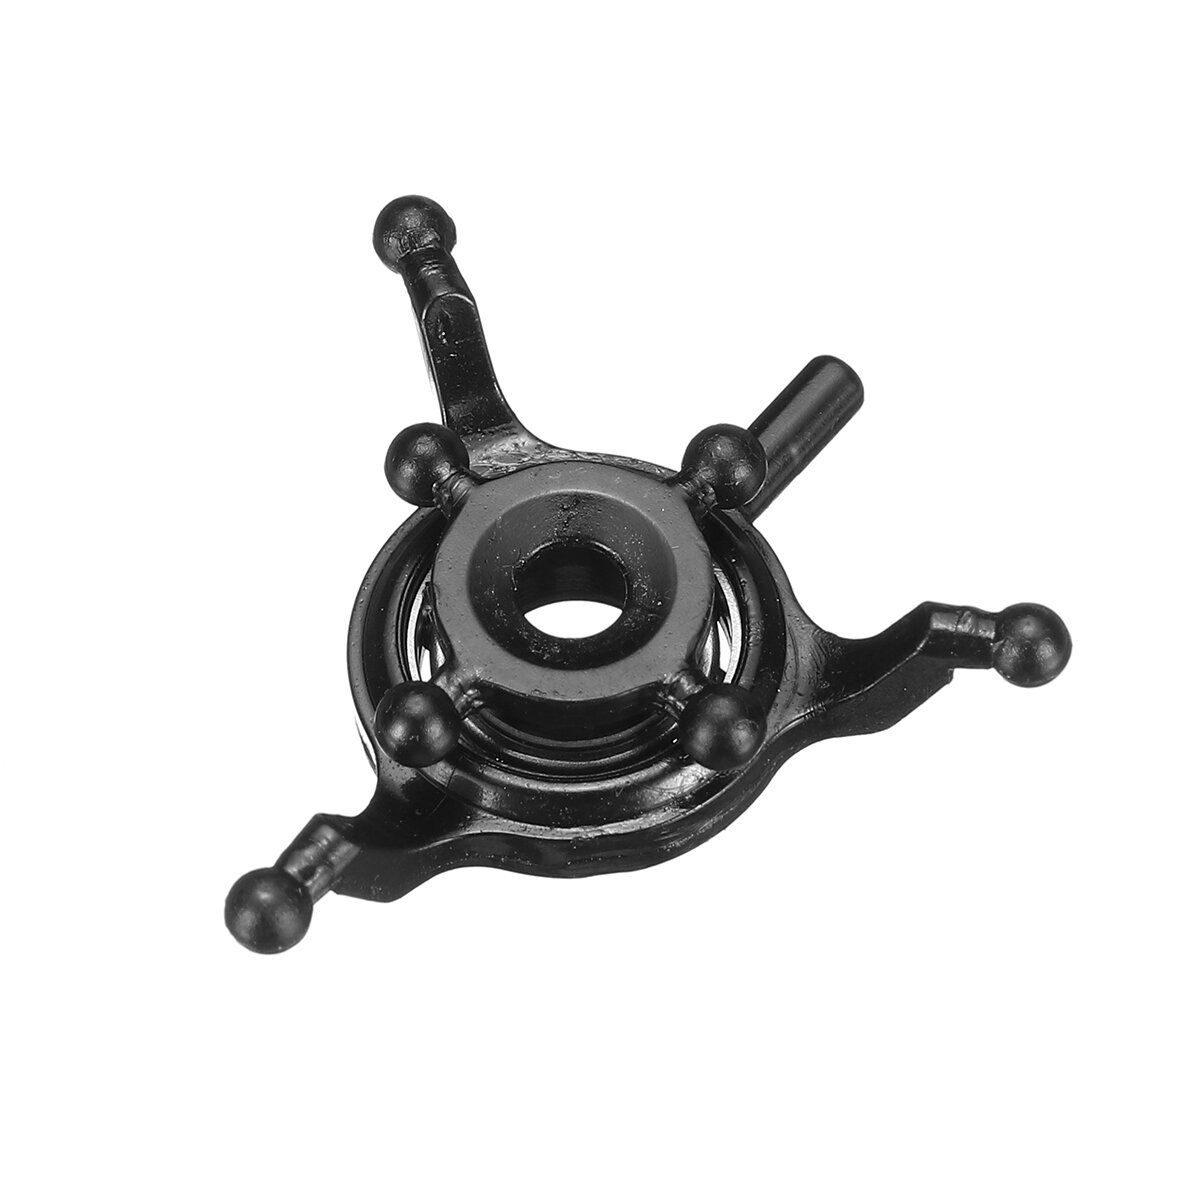 Eachine E120 Swashplate RC Helicopter Parts